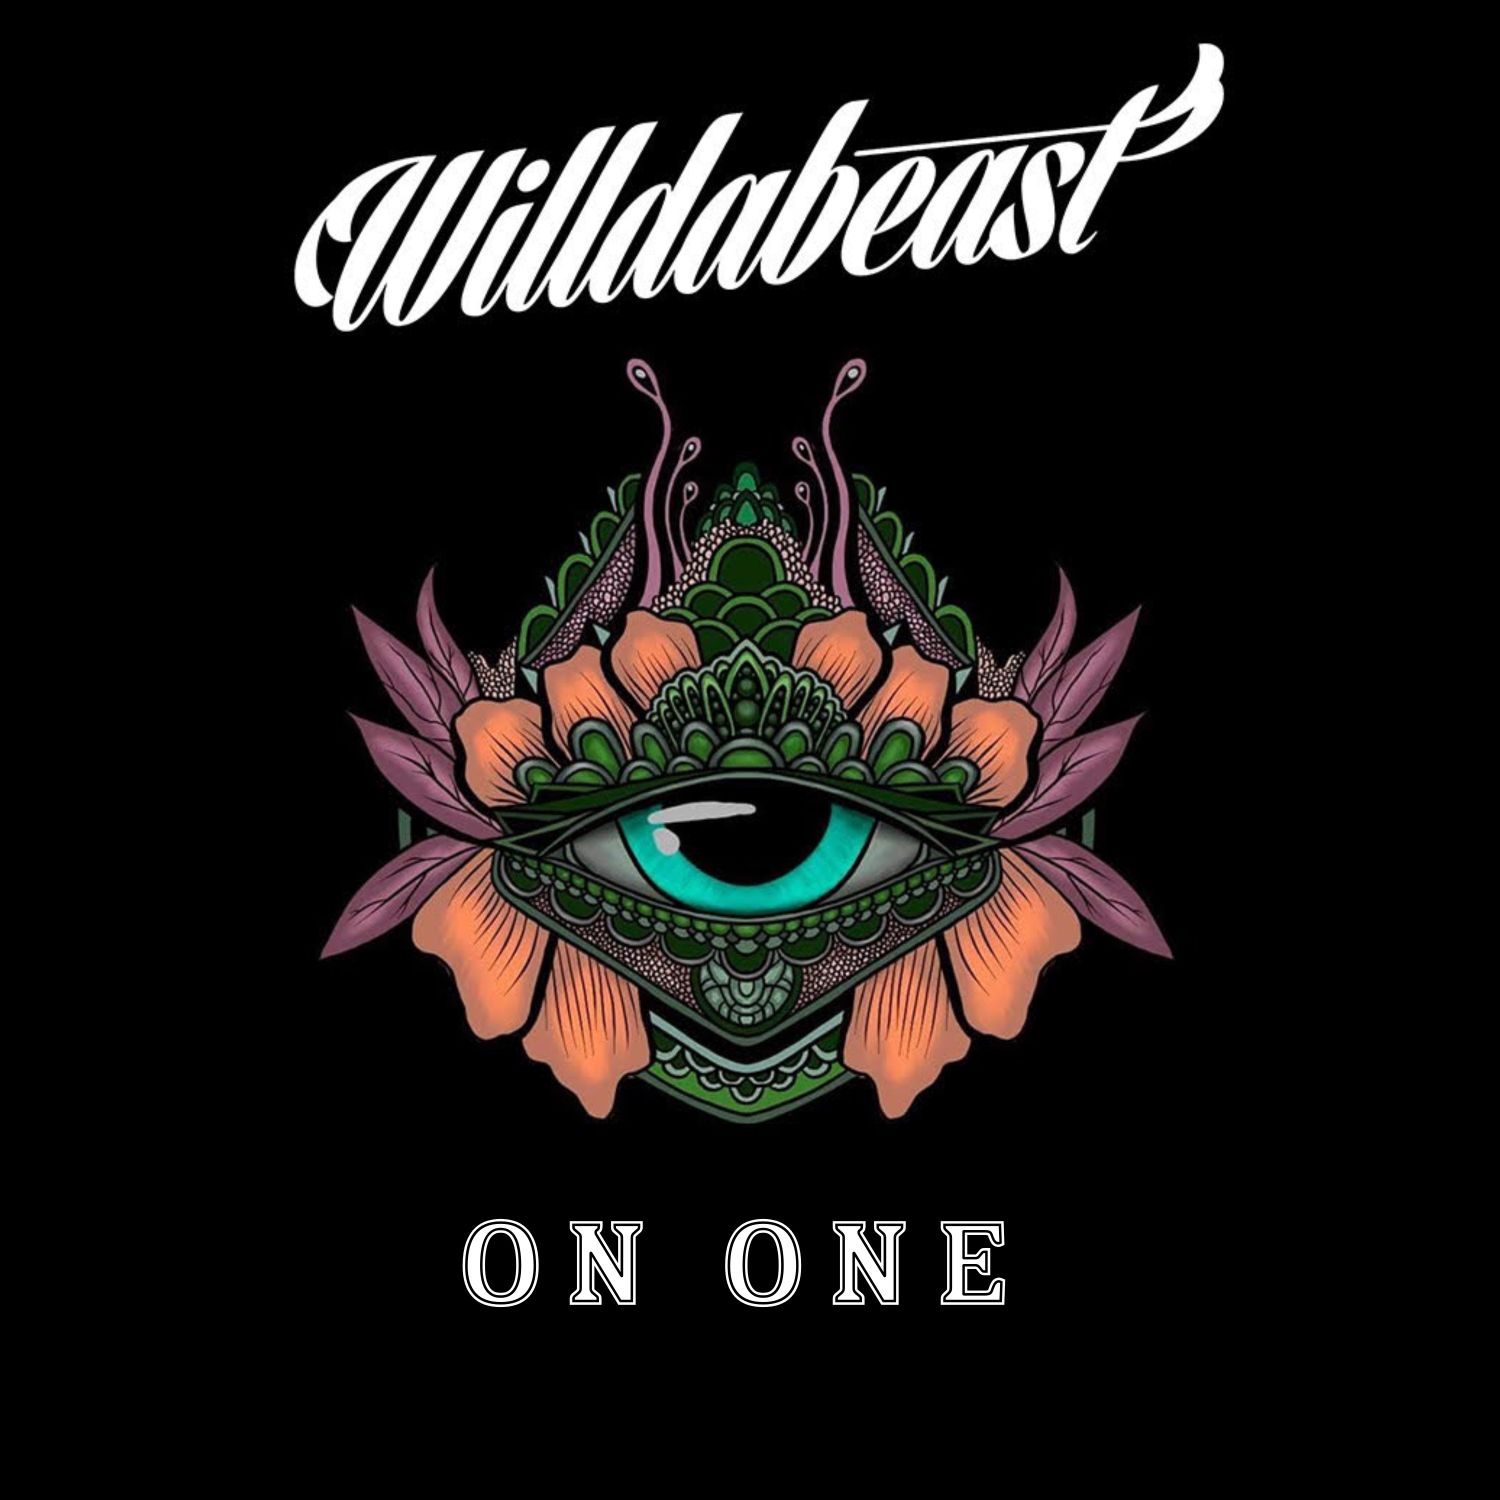 FEATURED LOCAL MUSIC: On One by Willdabeast